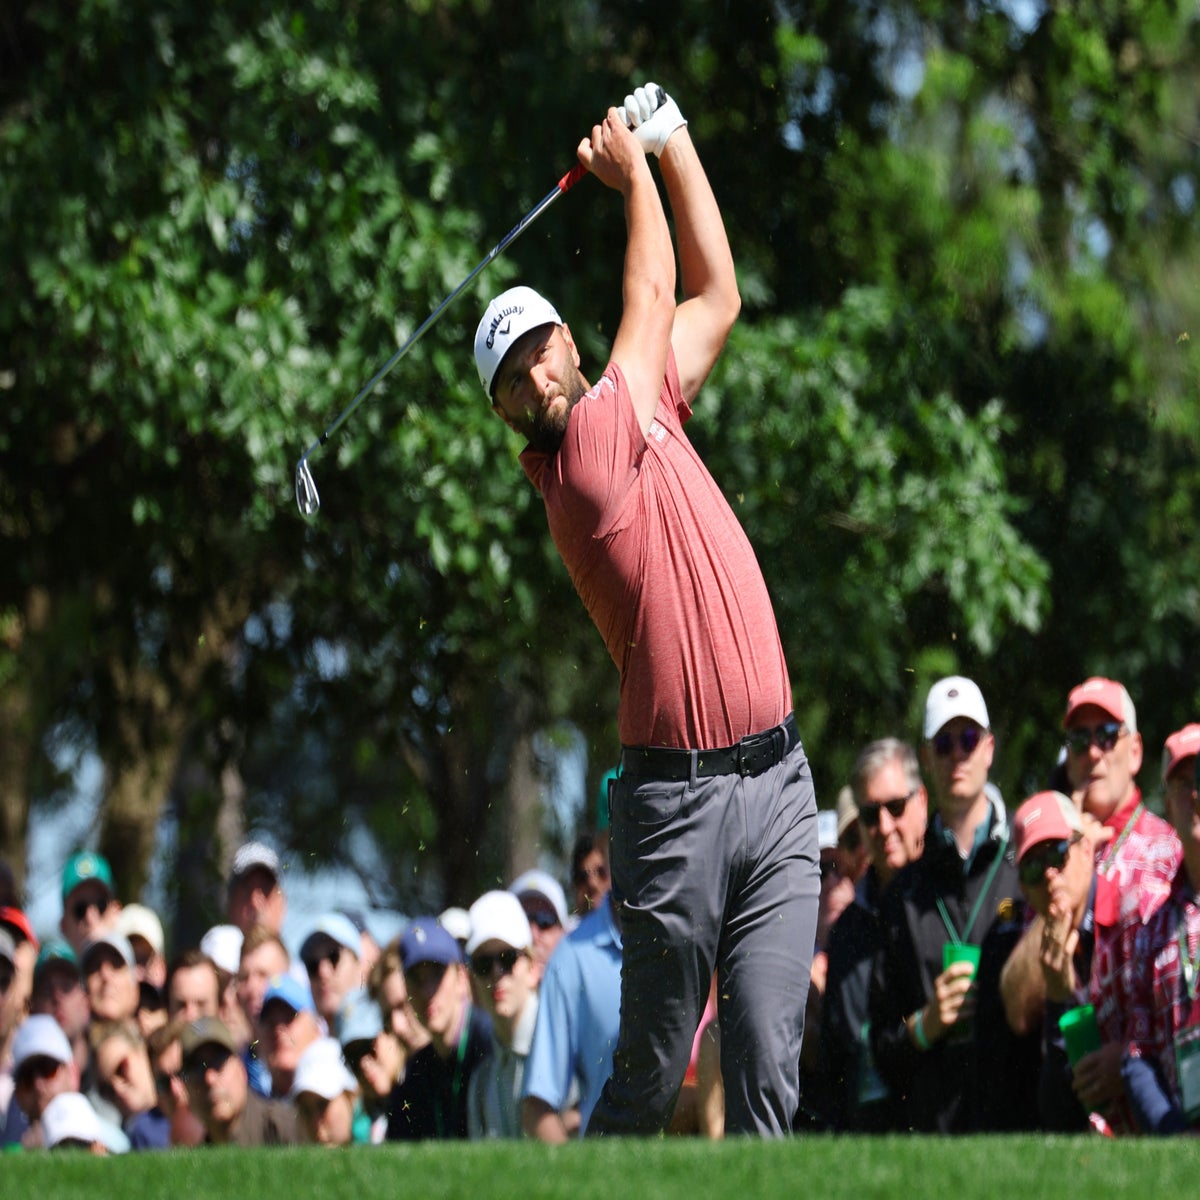 Masters prize money: How much each player earns at Augusta